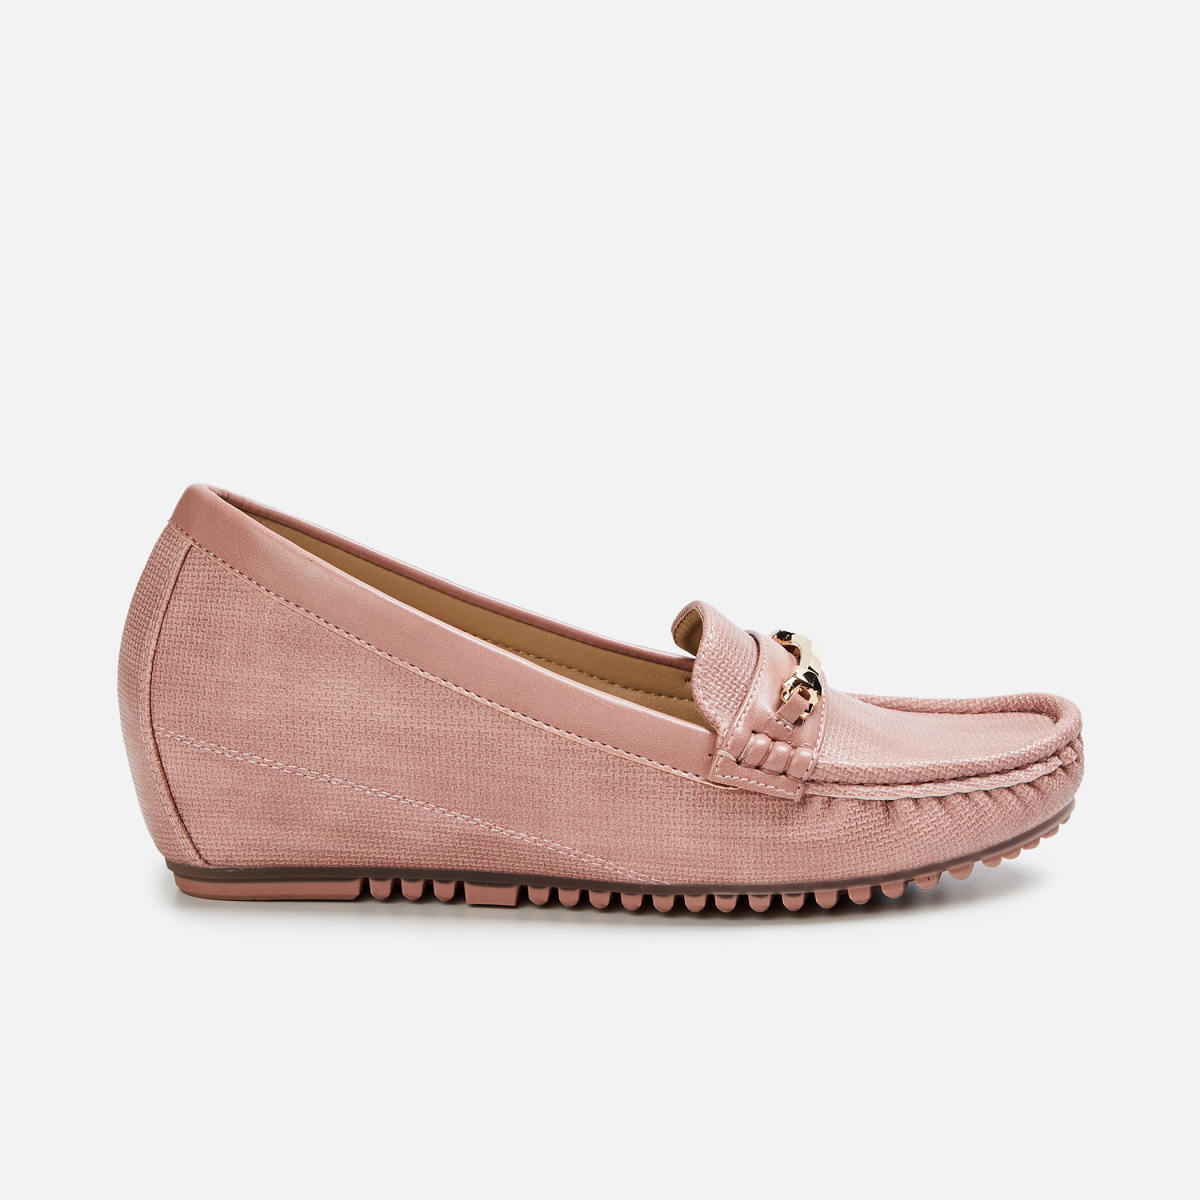 8 By YOOX LEATHER HEELED PENNY LOAFER | Women's Loafers | YOOX